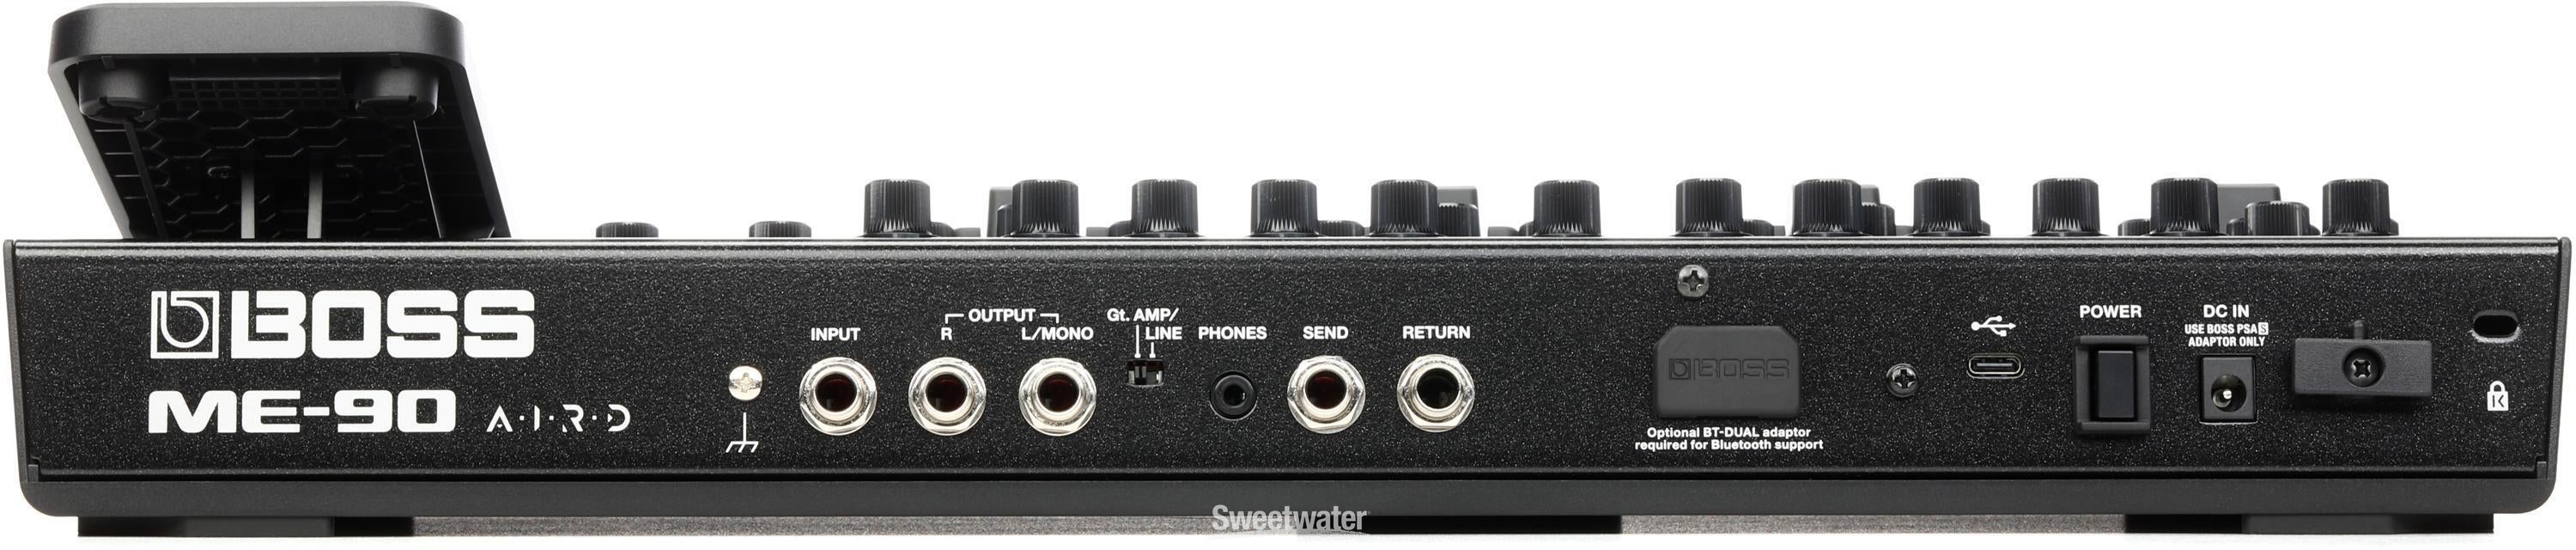 Boss ME-90 Guitar Multi-effects Pedal | Sweetwater